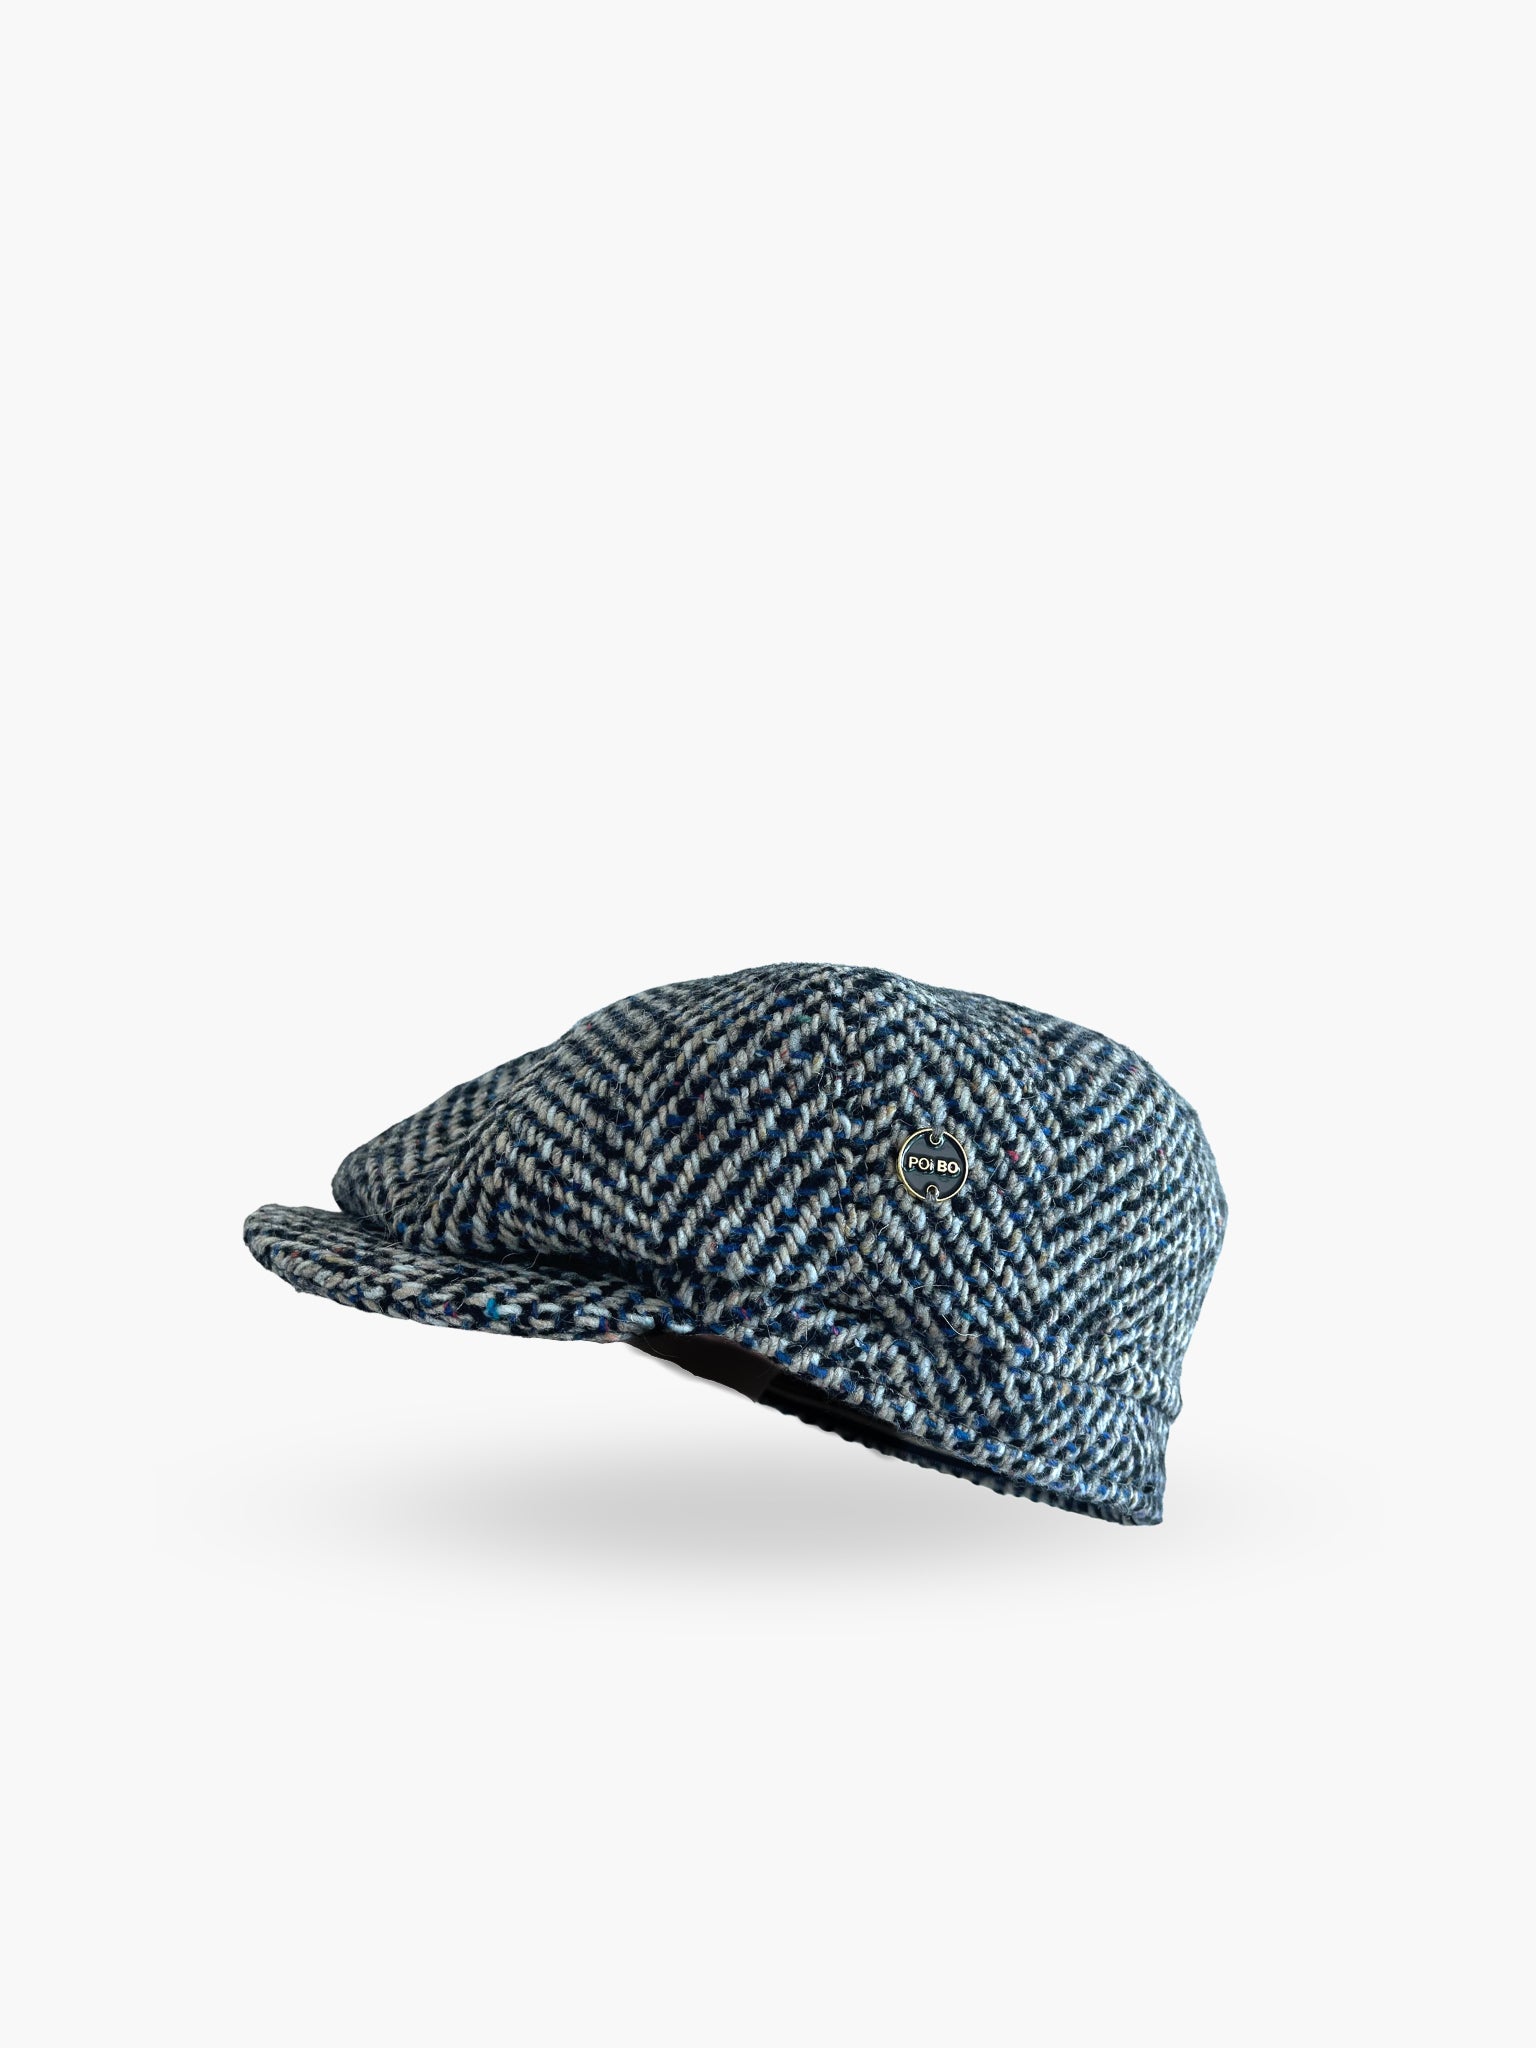 The Shelby Hat